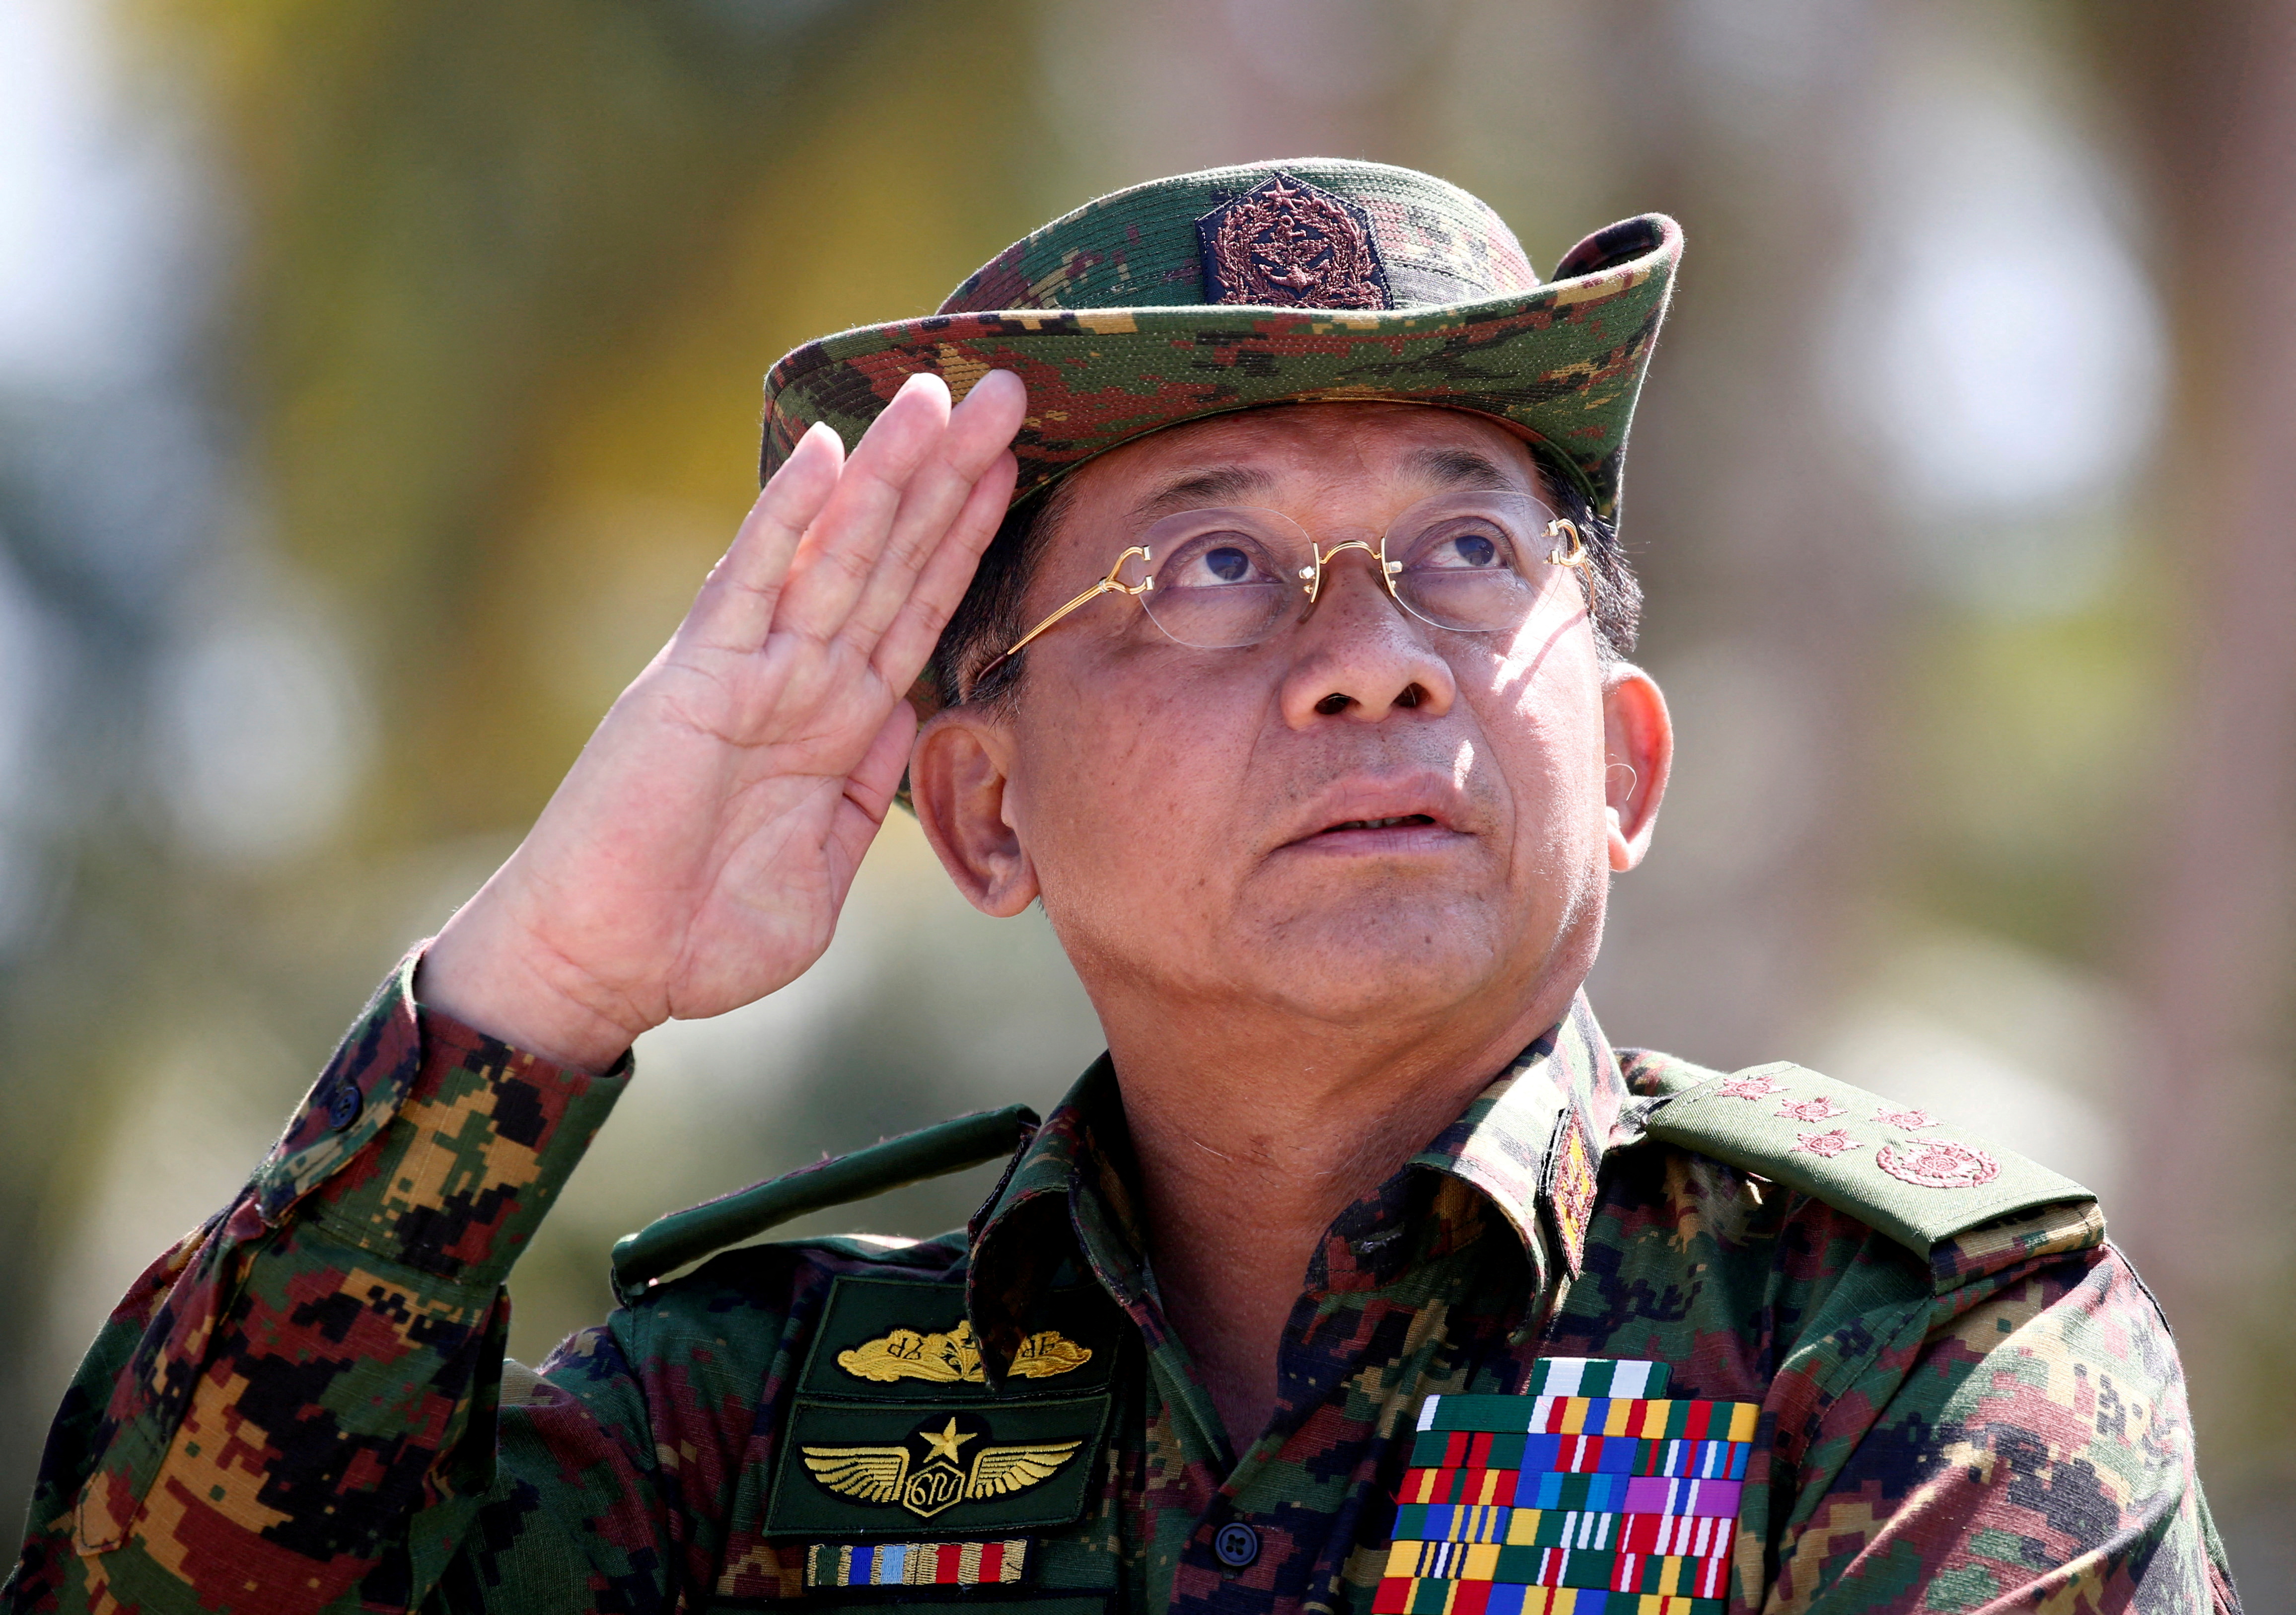 Myanmar military commander-in-chief, Senior General Min Aung Hlaing, salutes while attending a military exercise in the Ayeyarwaddy delta region